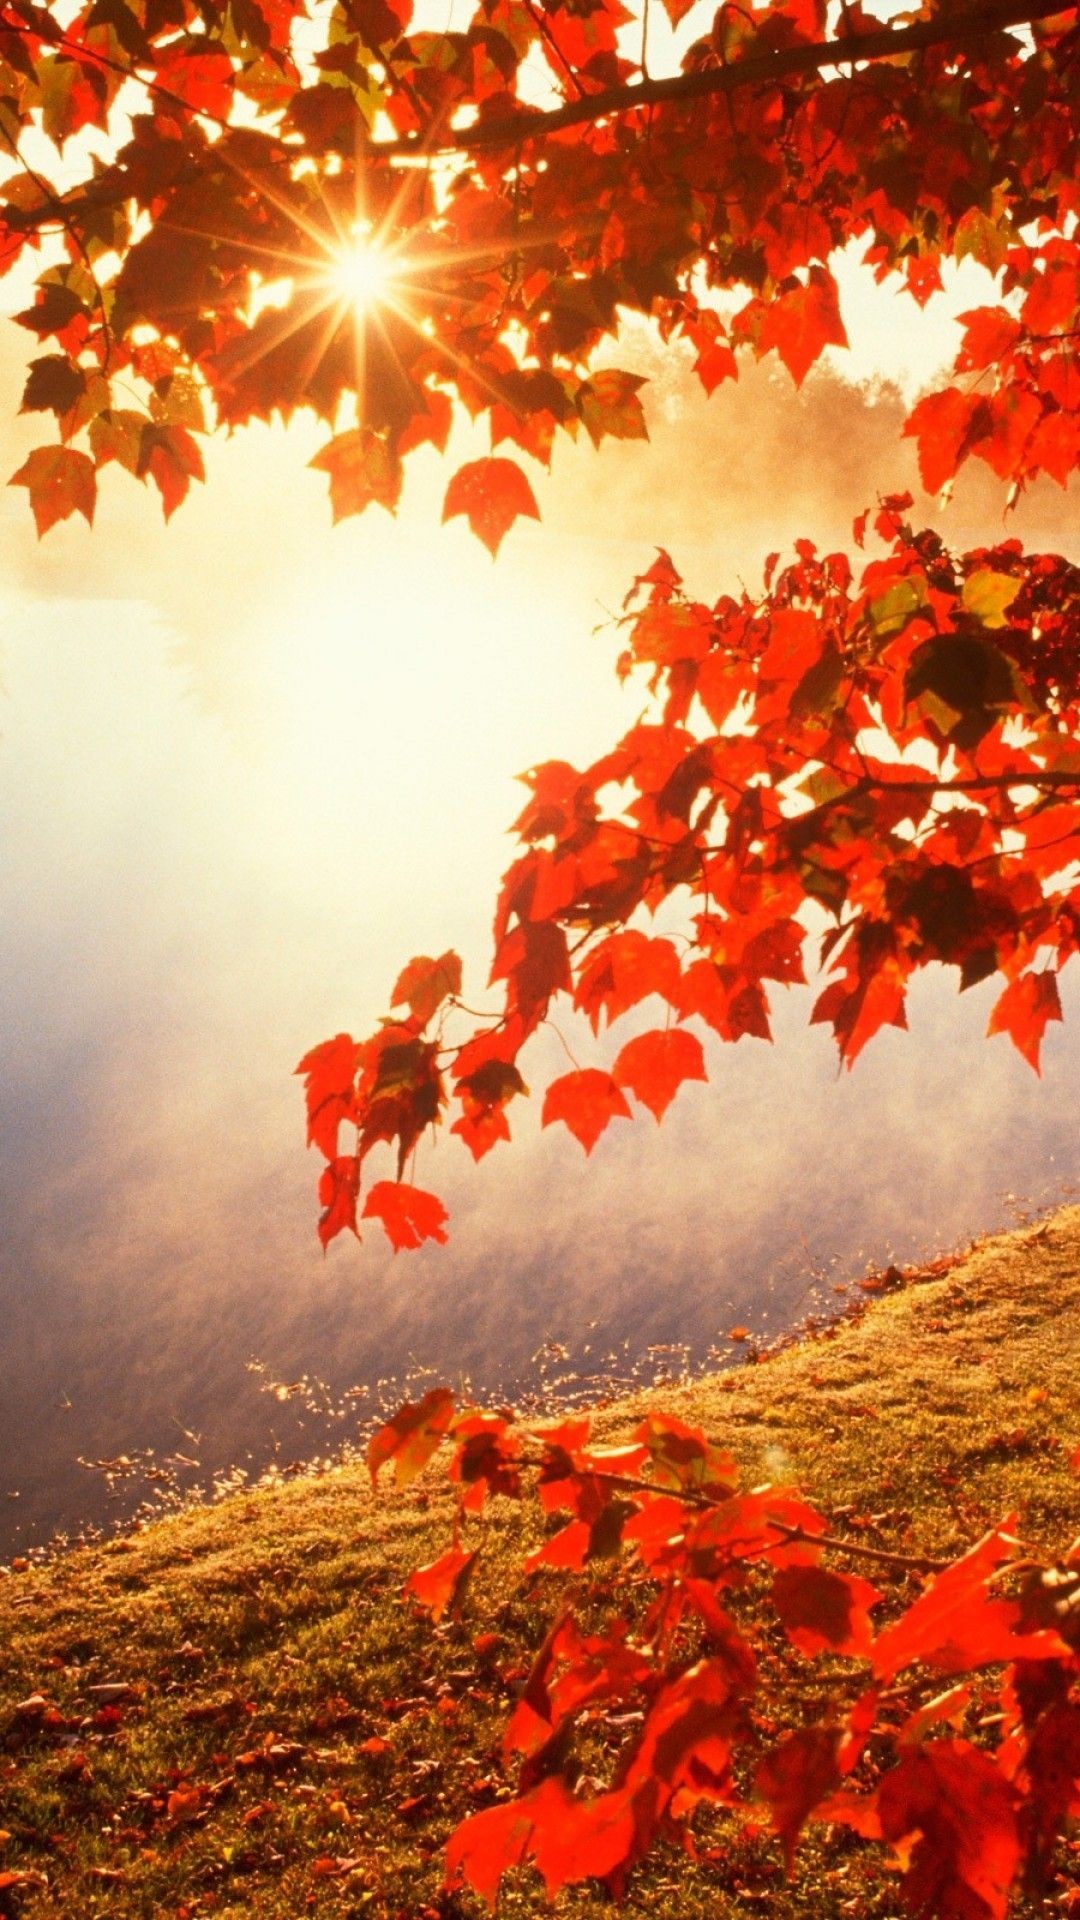 1080x1920 1920x1080 Full HD Autumn or Fall Wallpapers with Maple Leaves">